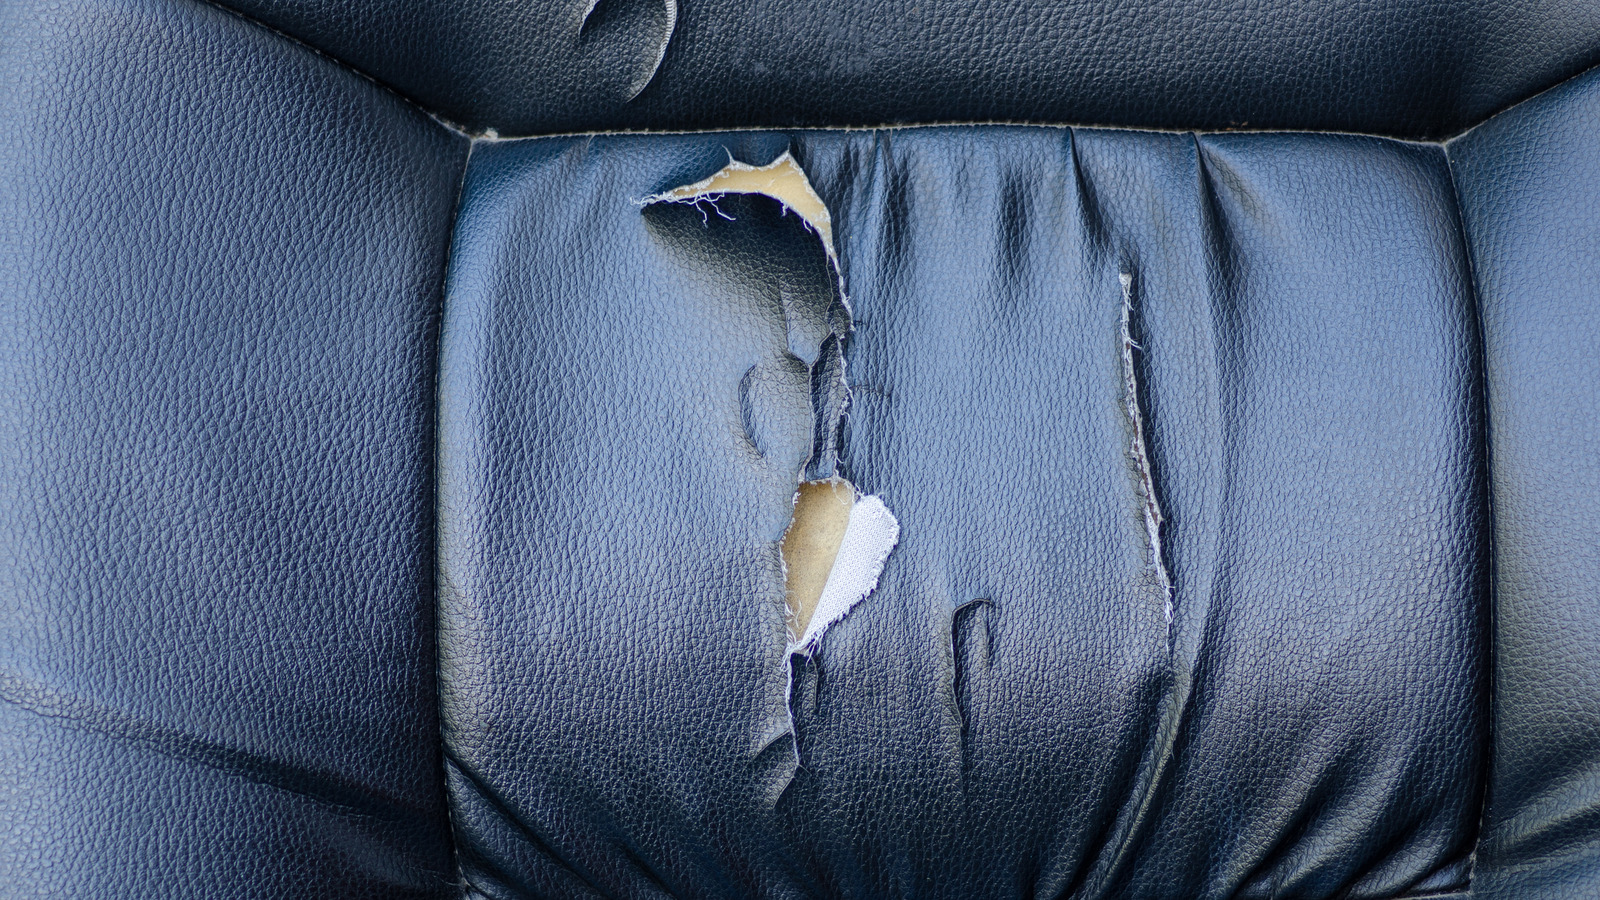 How To Fix A Tear In Leather Car Seat